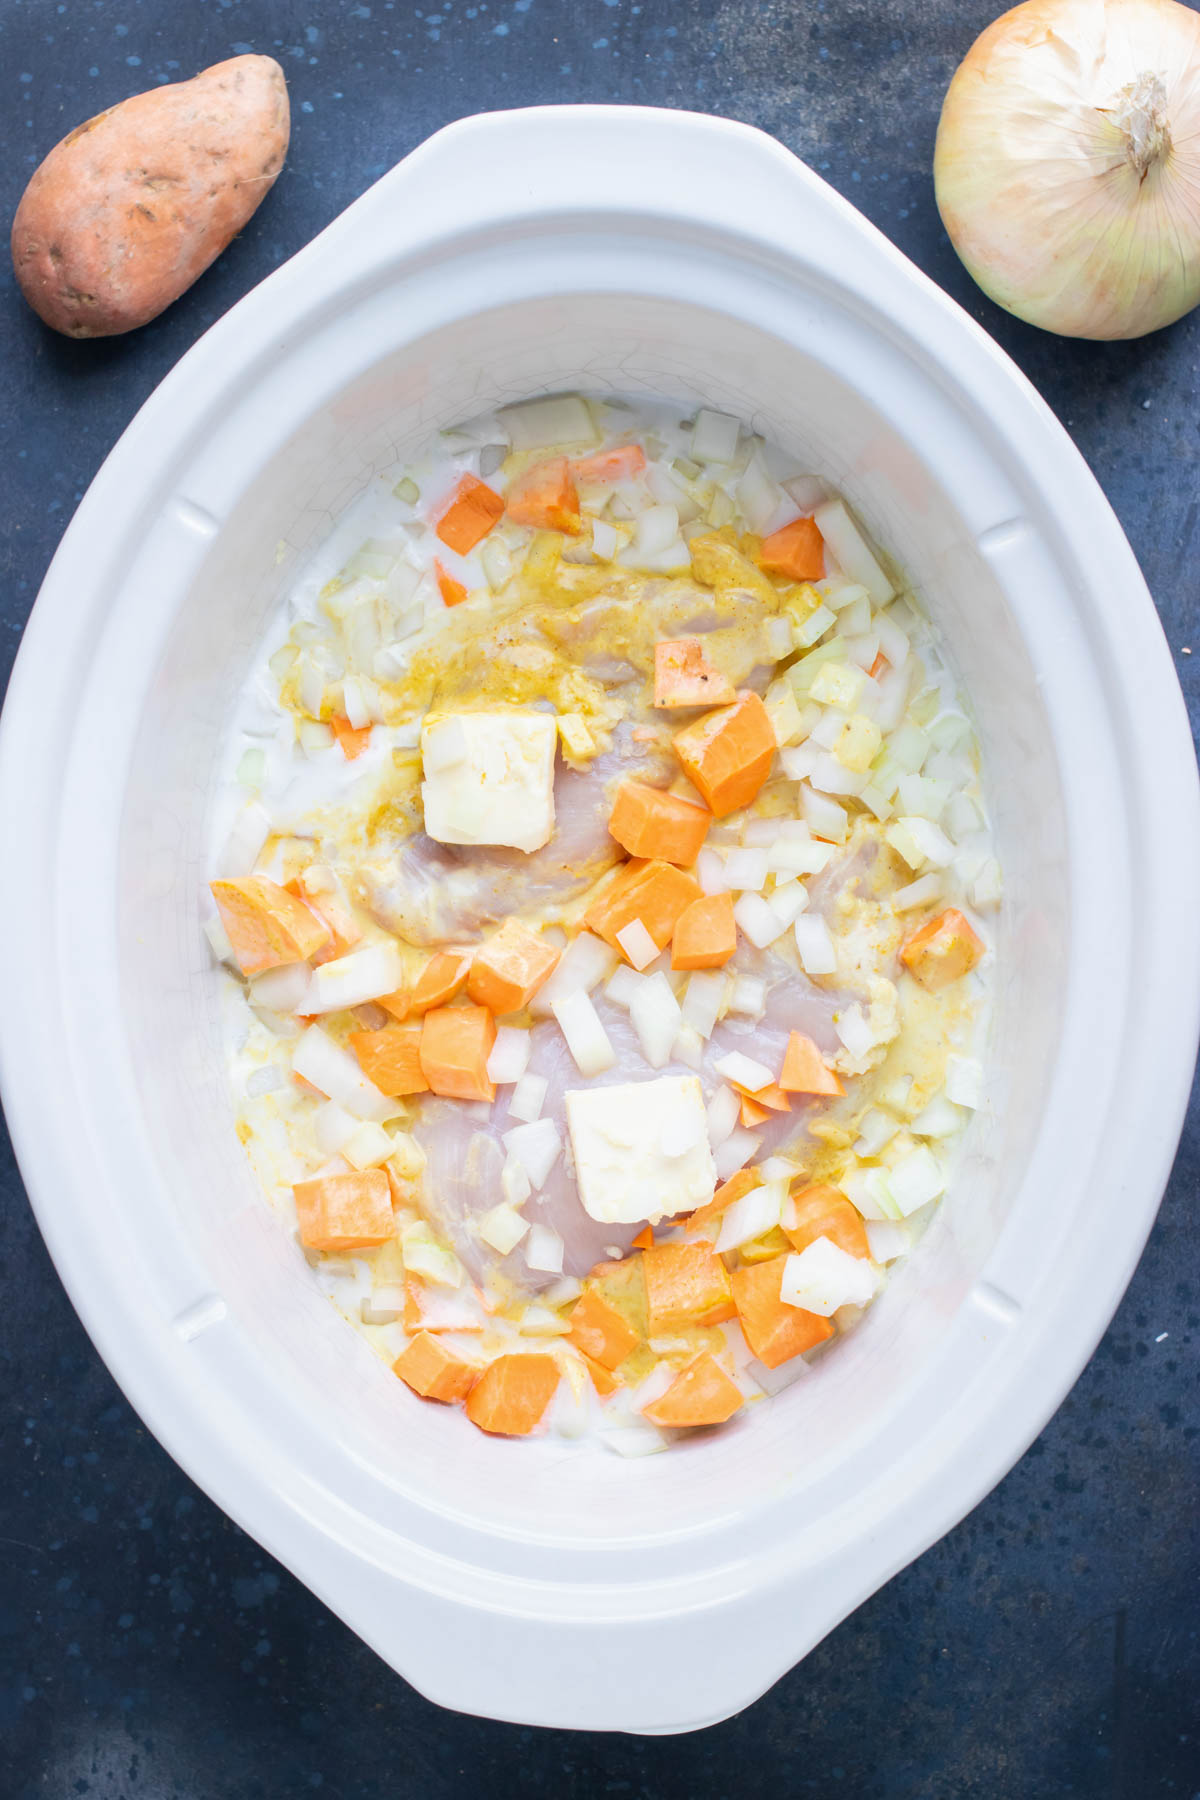 Sweet potatoes and seasoning are added to the slow cooker.